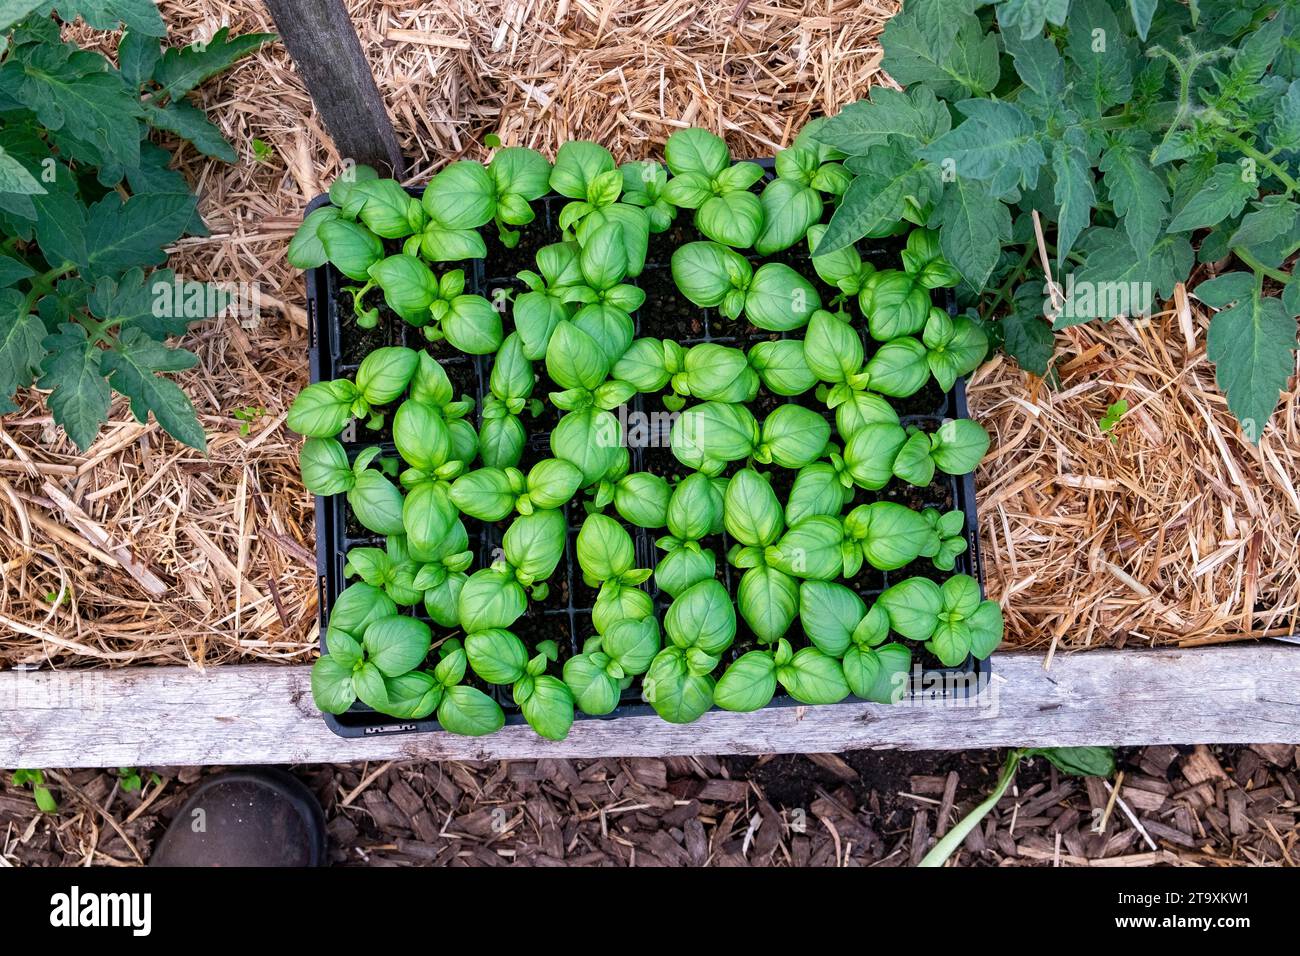 A tray of Basil seedlings ready to be planted out under tomato plants mulched with sugar cane mulch, as a companion planting Stock Photo